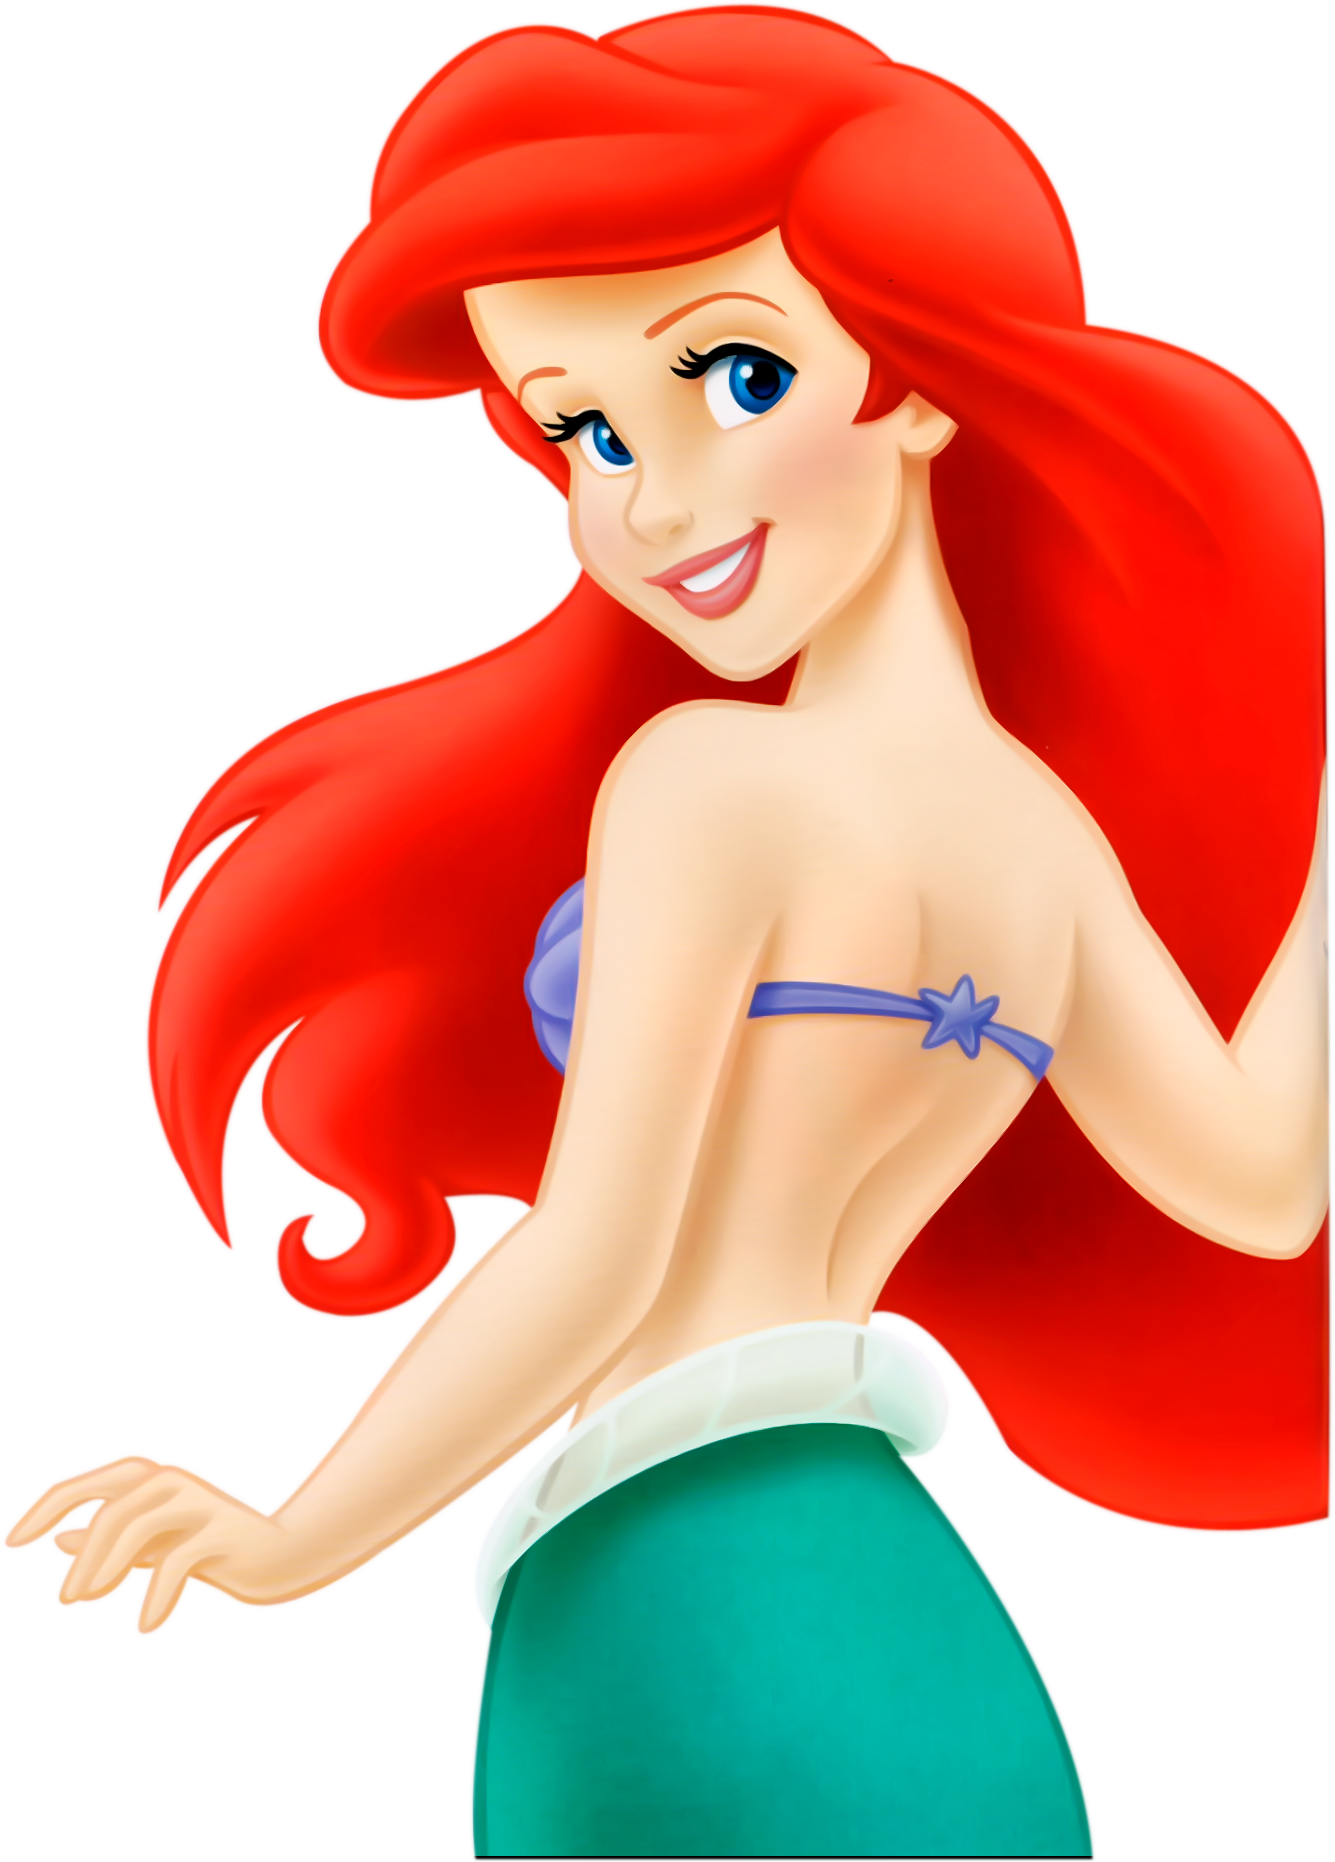 Little Mermaid Ariel Character Illustration PNG image